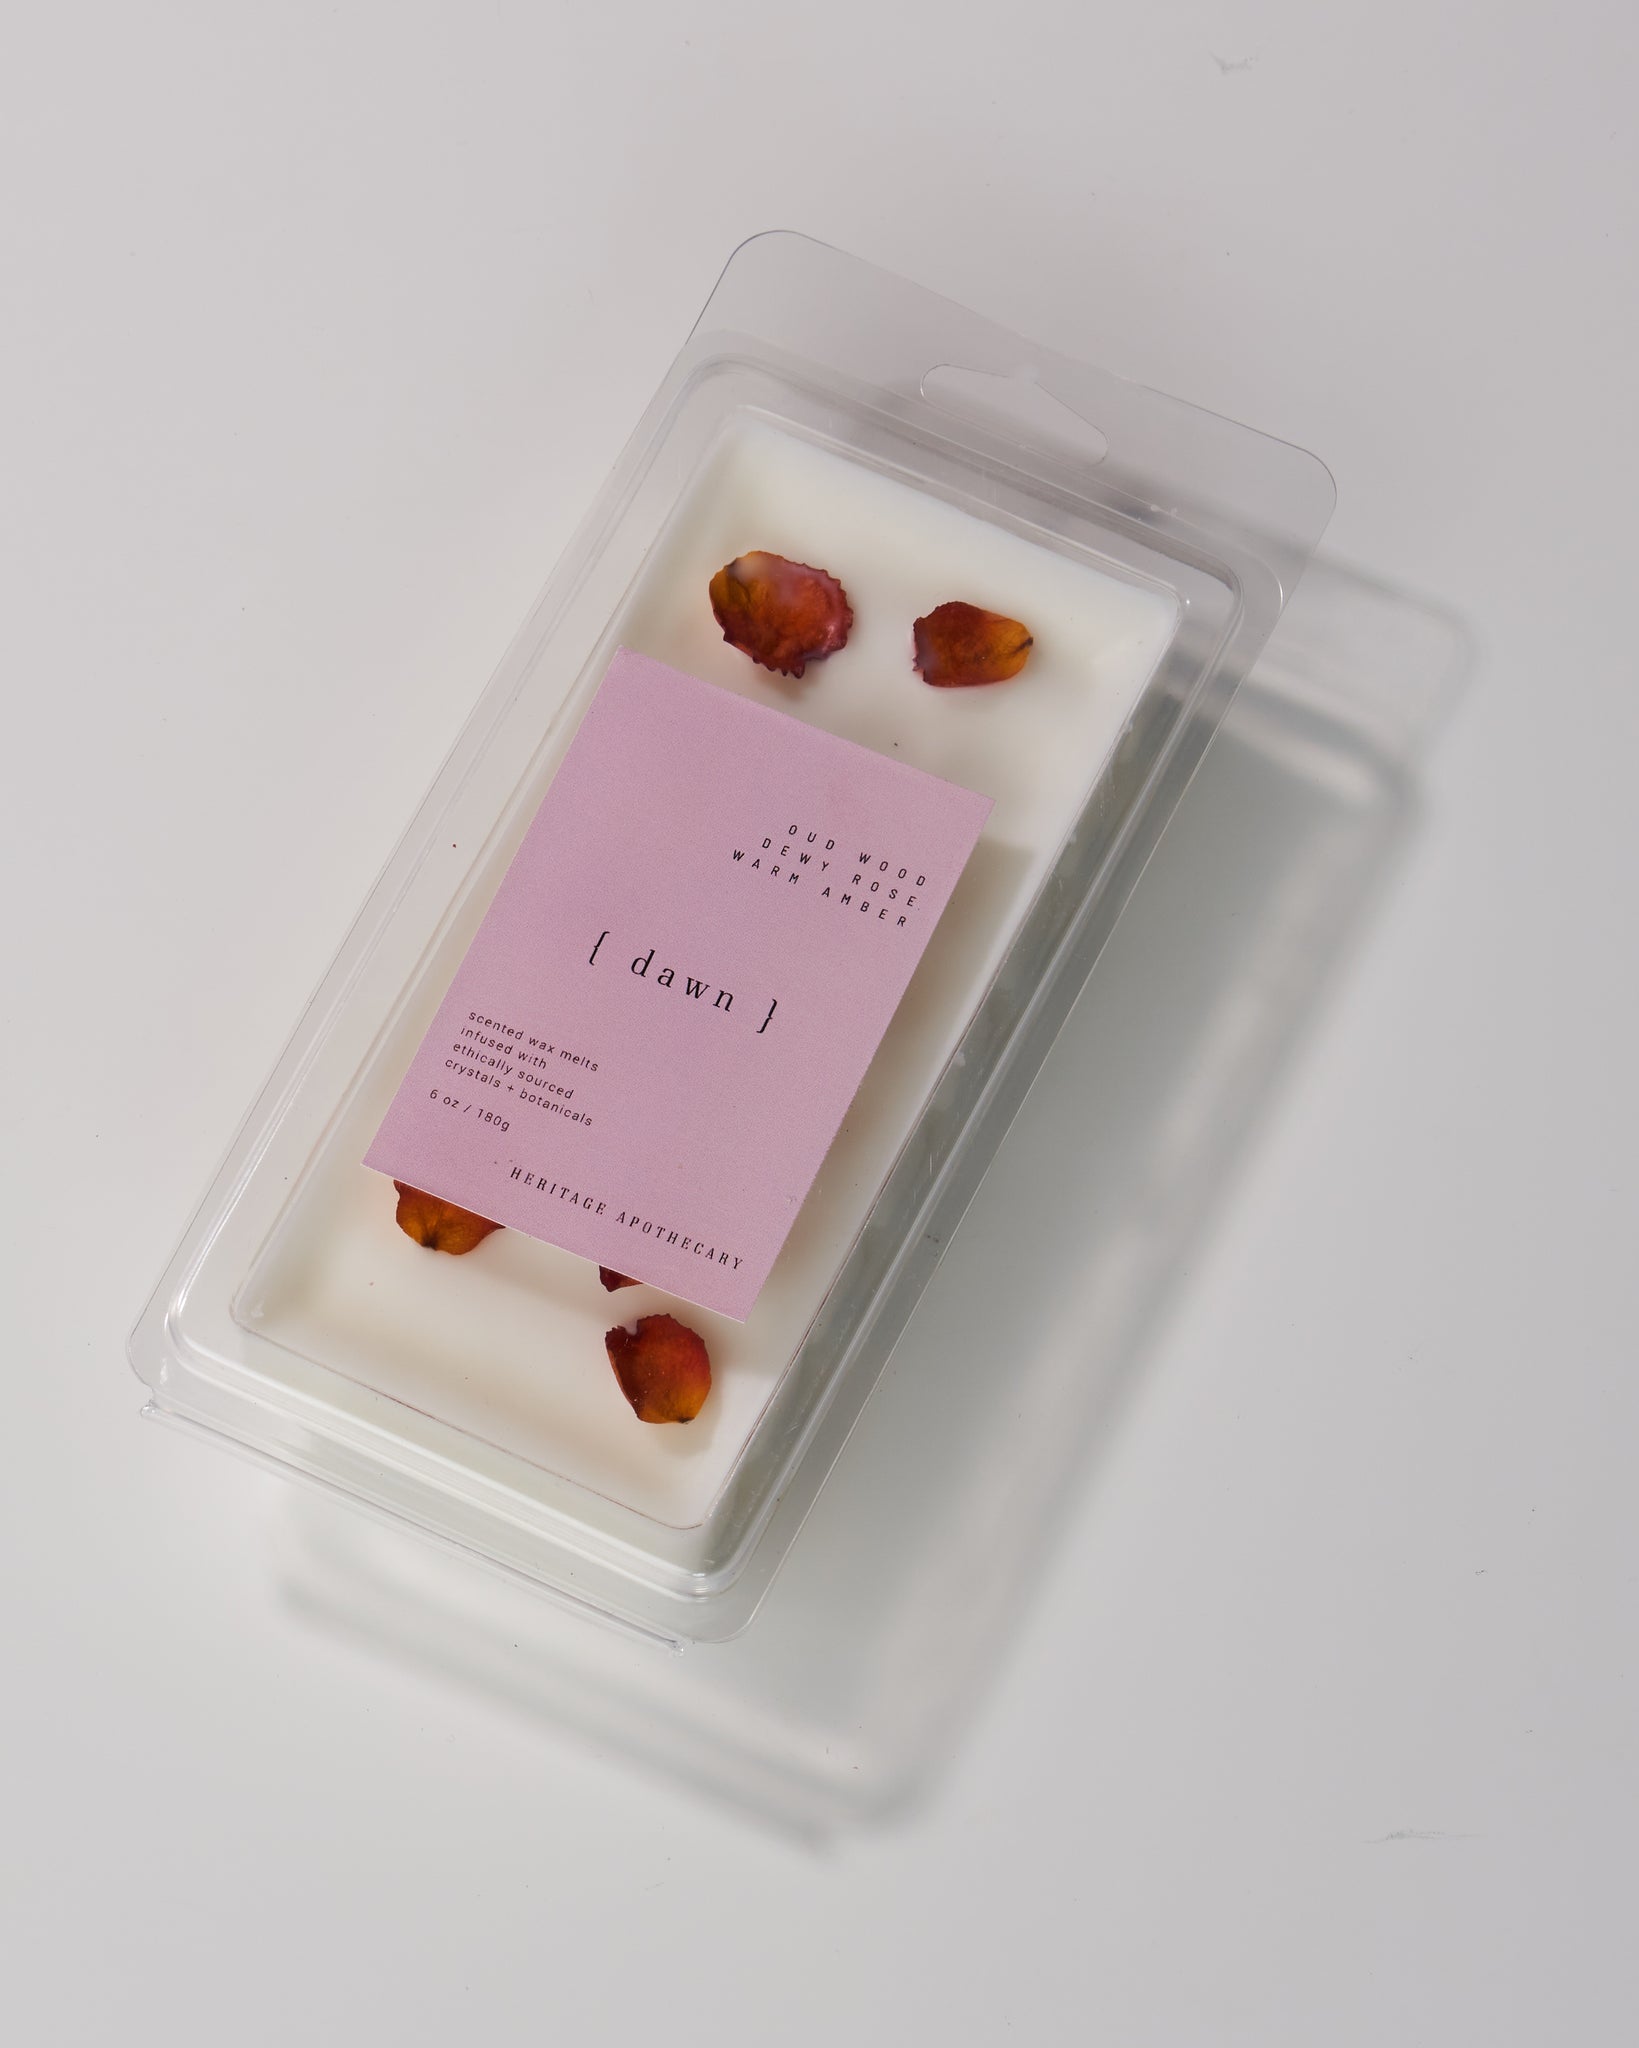 Coconut and soy wax melts in Dawn scent - a dynamic blend of cedar, amber, guaiac wood, cumin, rose, and musk. Infused with hand-picked rose petals to enhance your home's fragrance